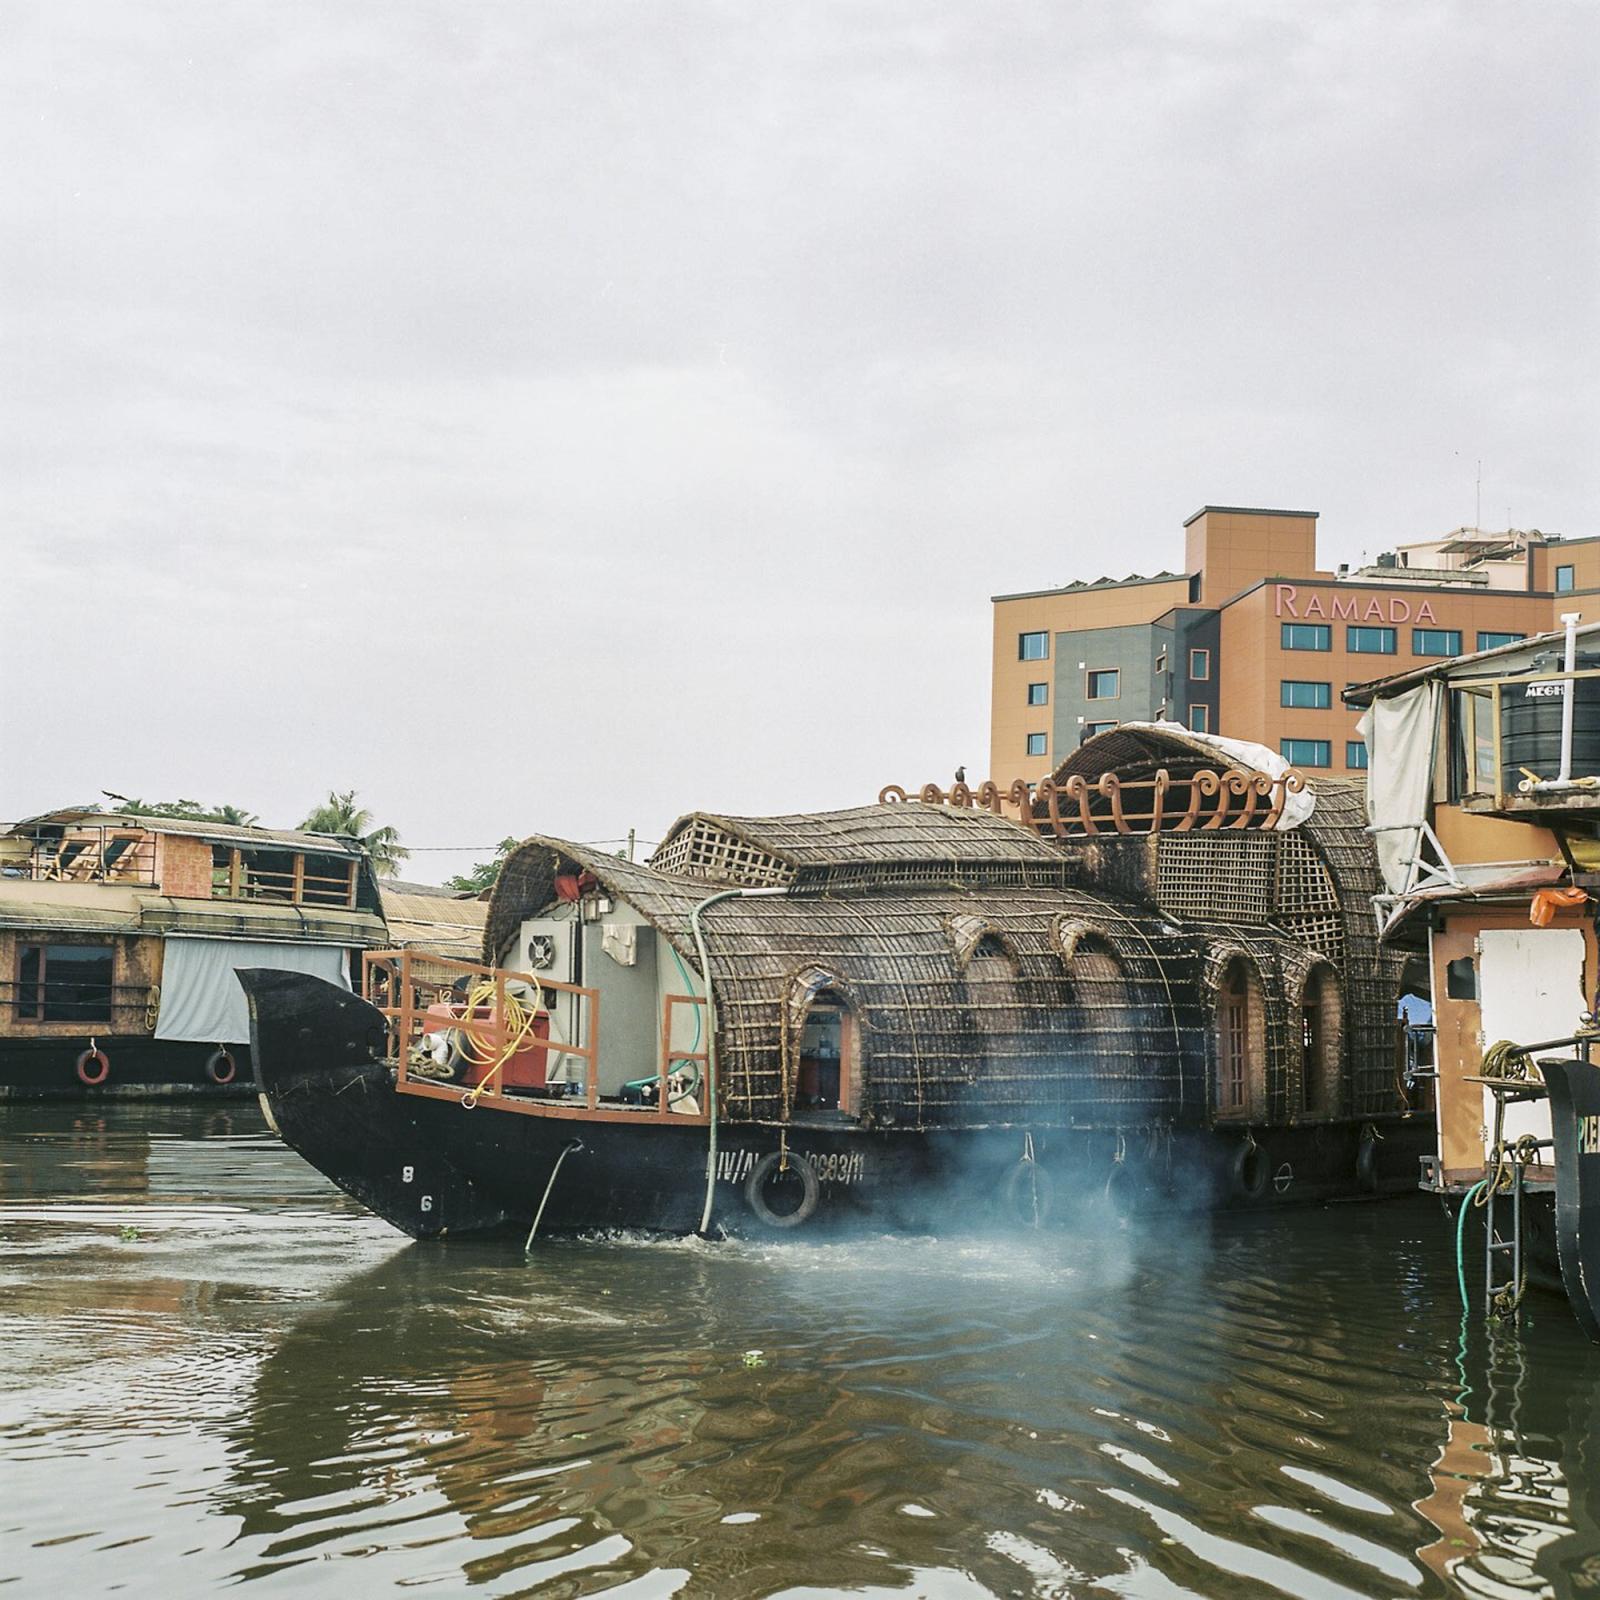 Can Solar Power fuel India's Iconic Houseboat Capital?